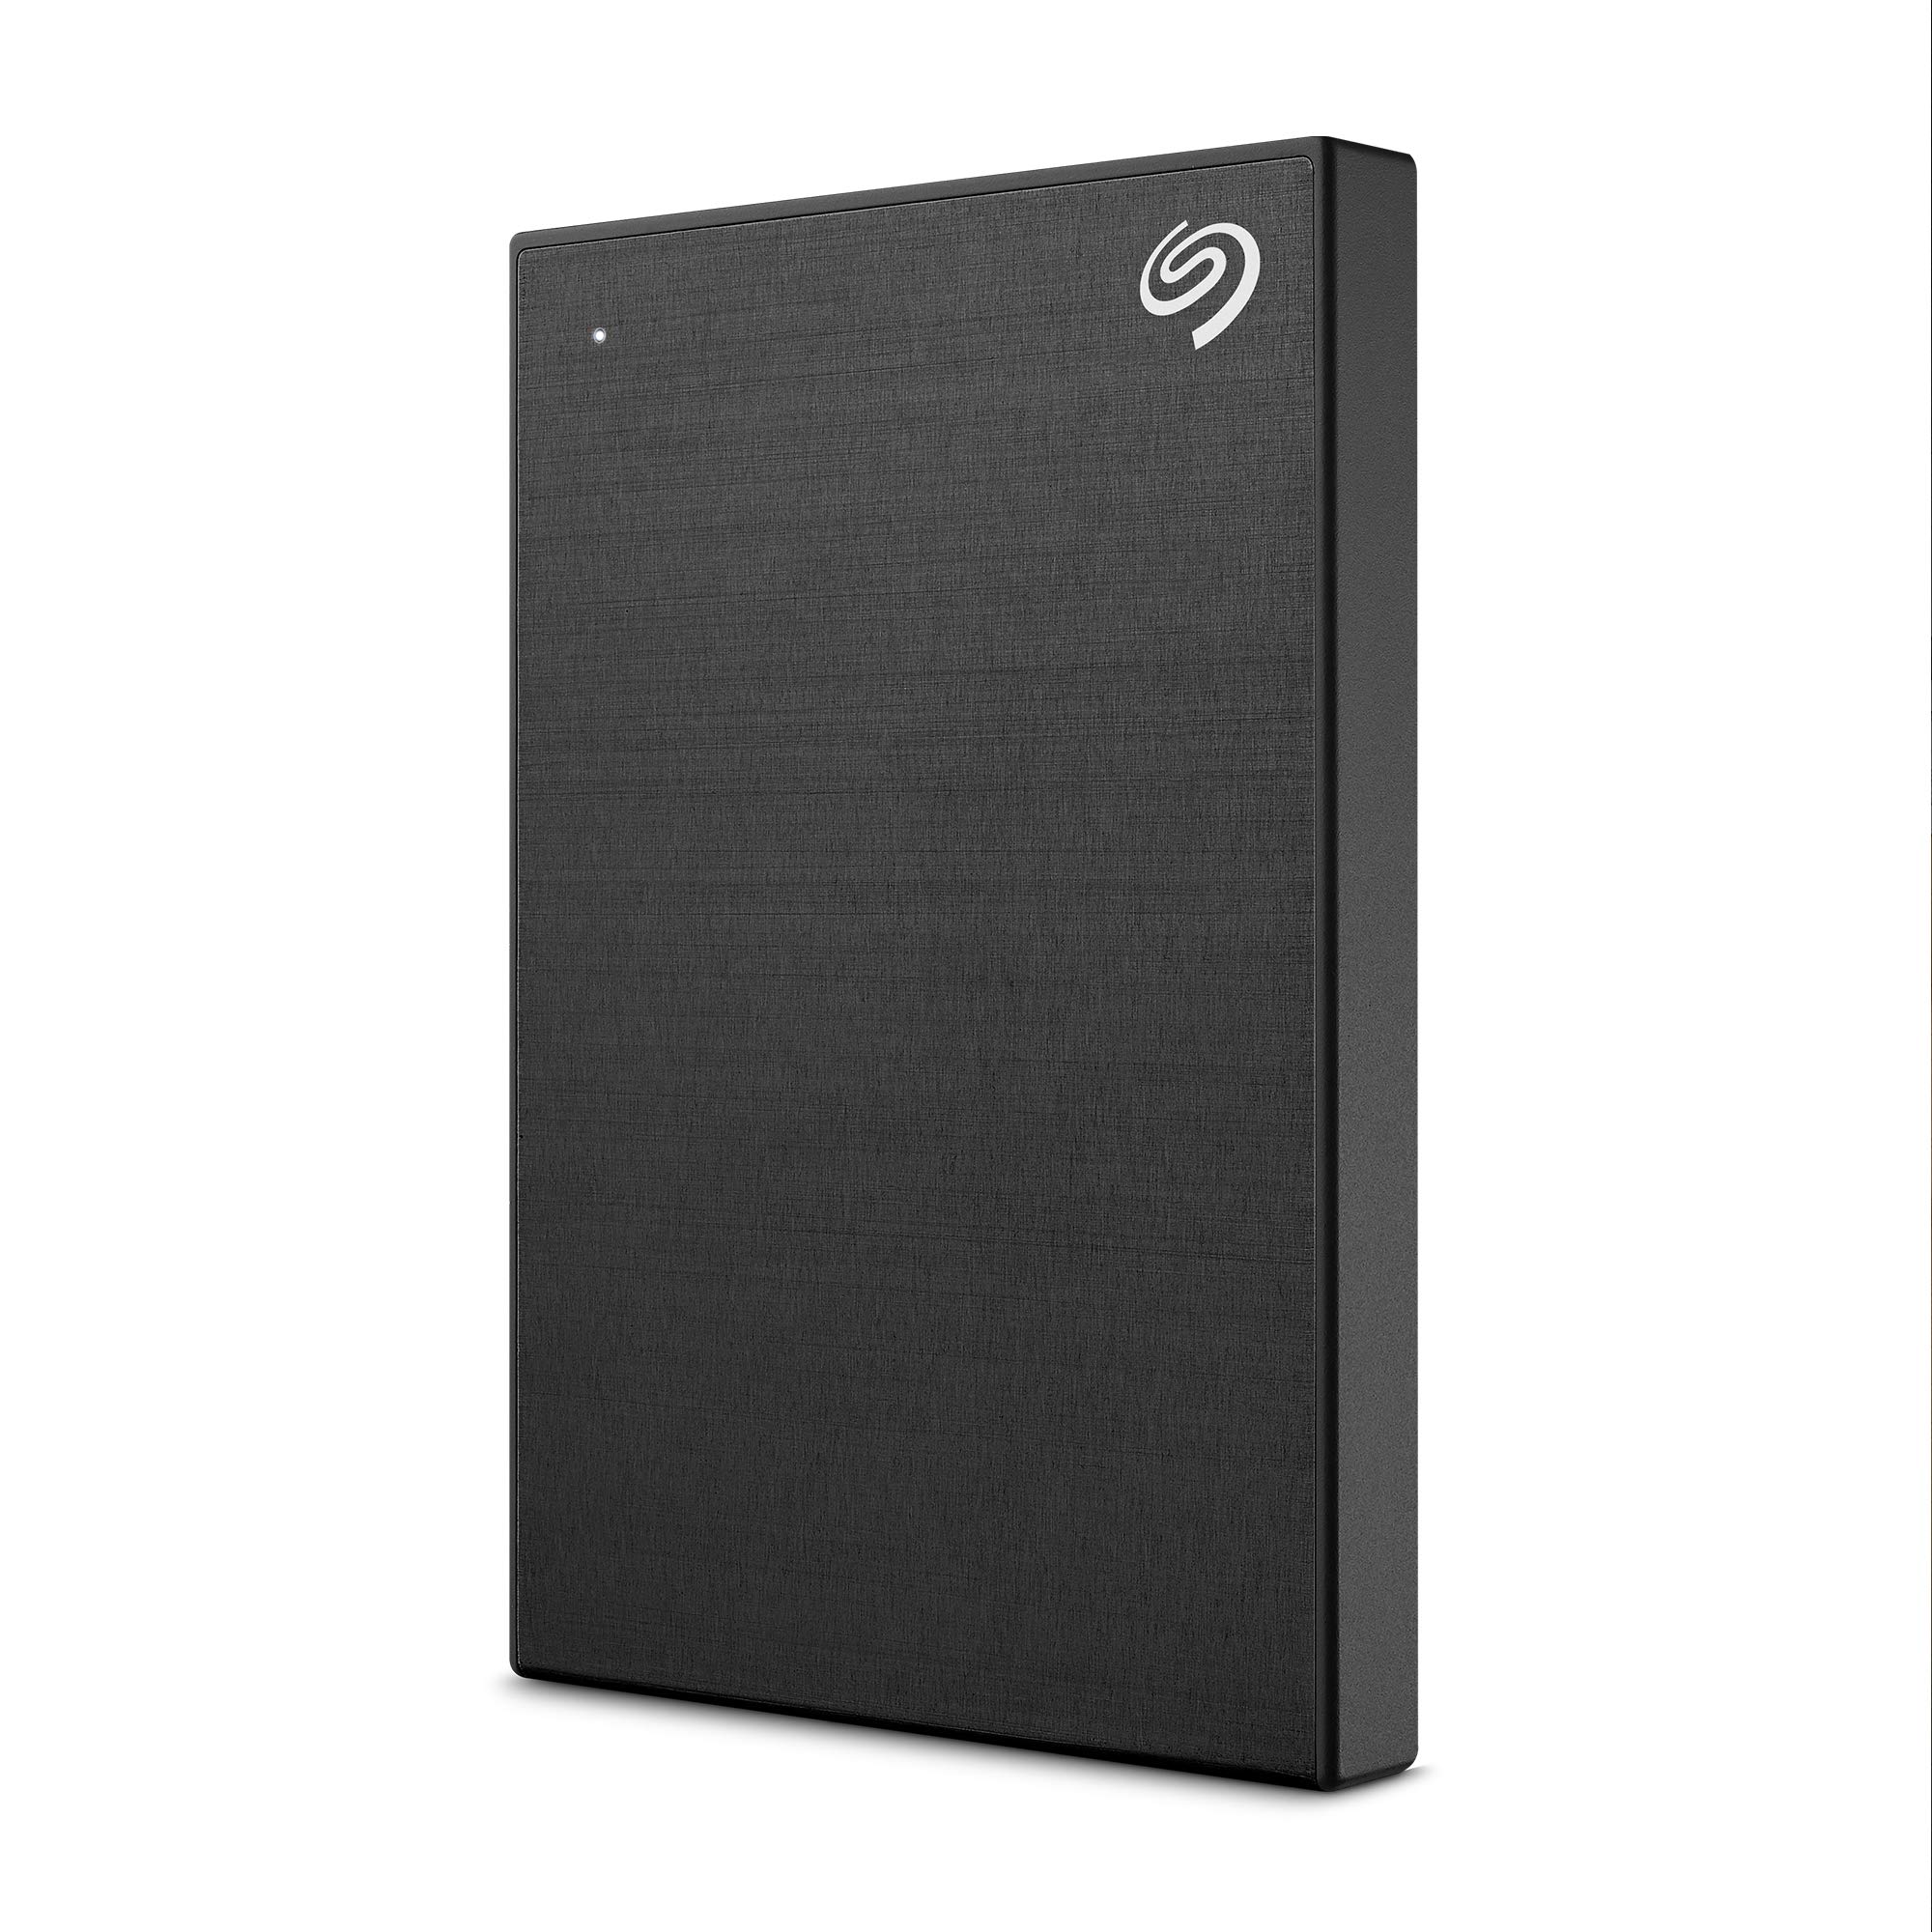 Seagate One Touch HDD with Password 2TB External Hard Drive – Black, for PC Laptop Mac and Chromebook, 6mo Mylio Photos and Dropbox, Rescue Service (STKY2000400)